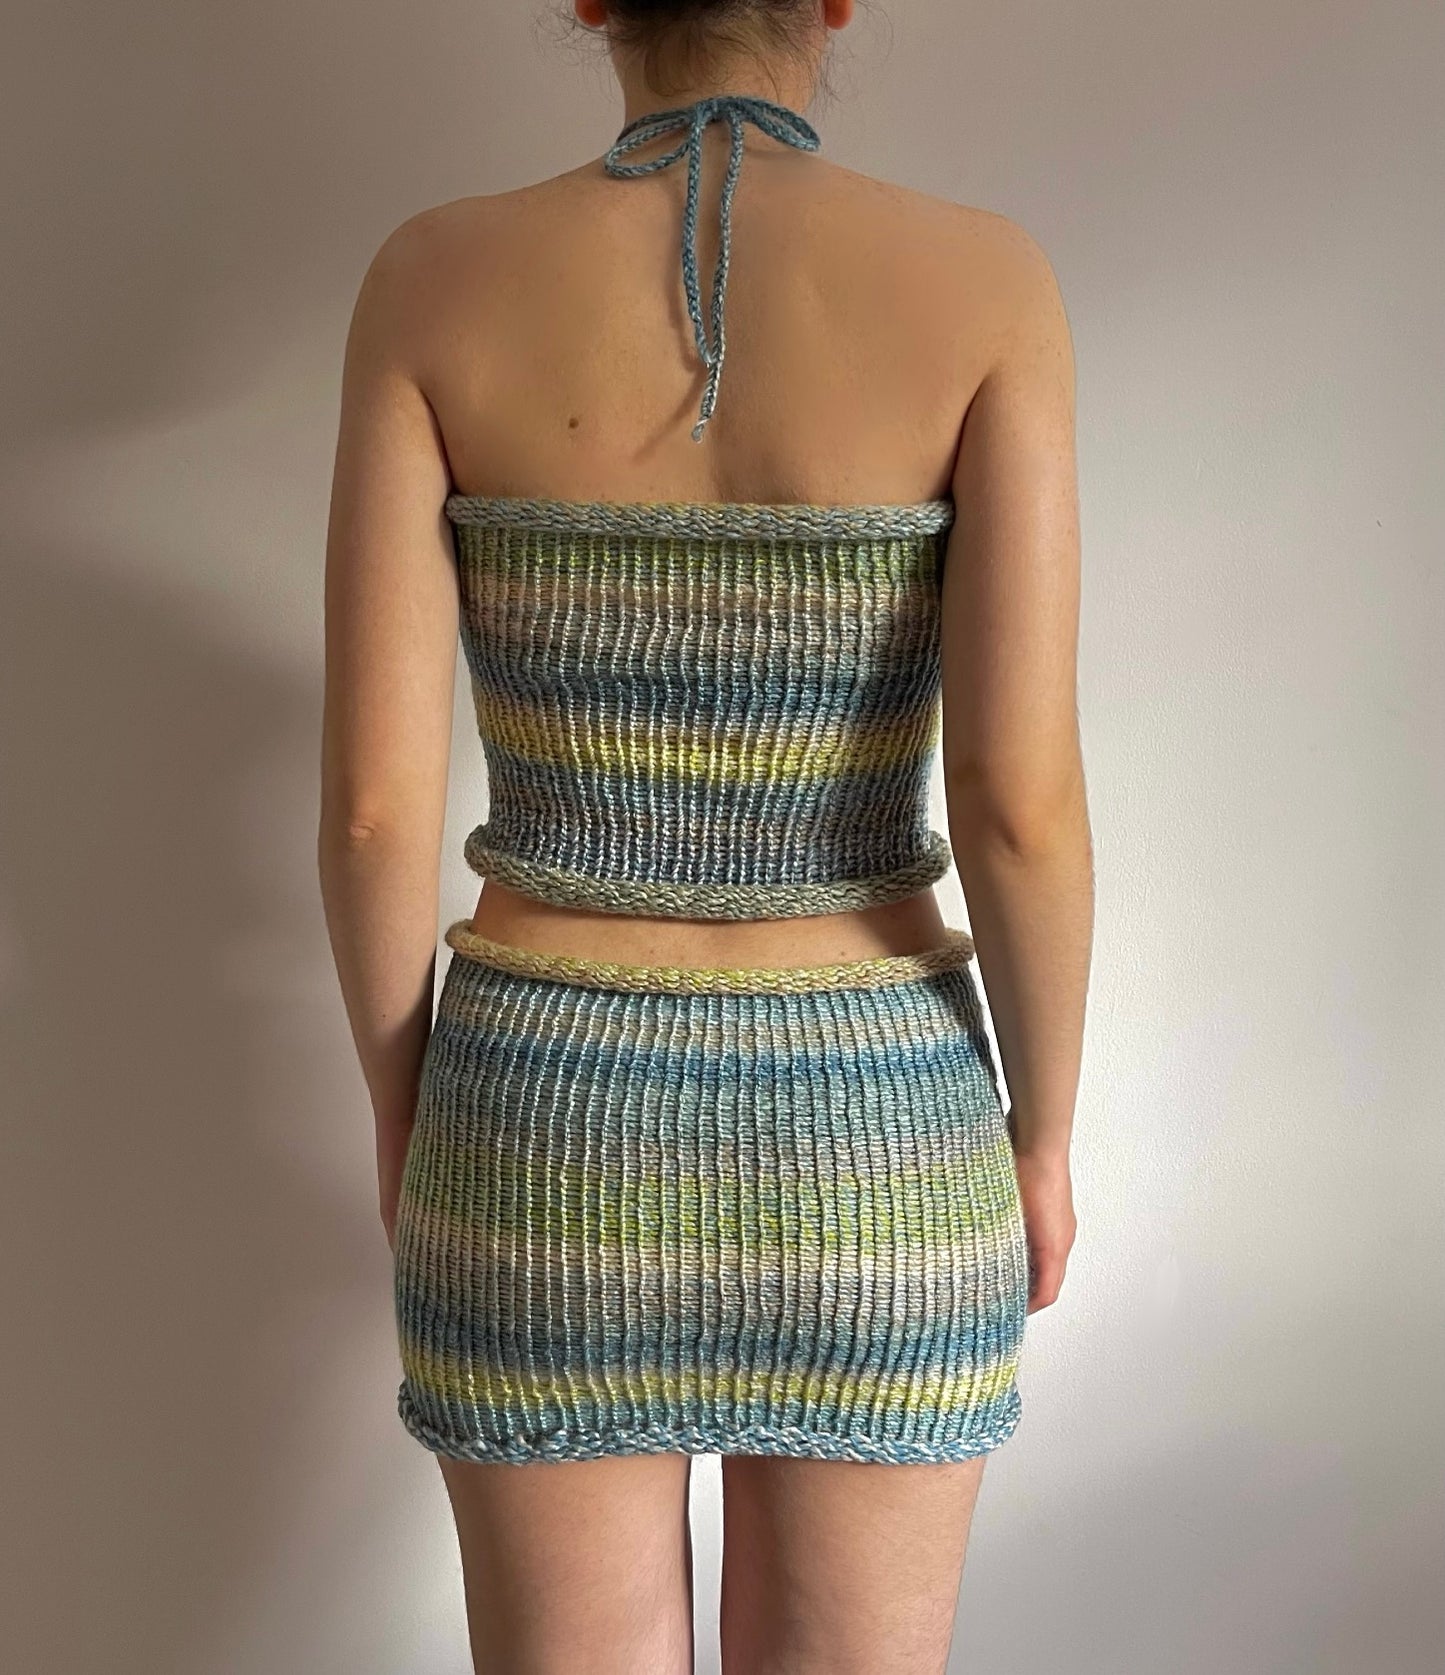 Handmade knitted halter top in green, beige, yellow and blue